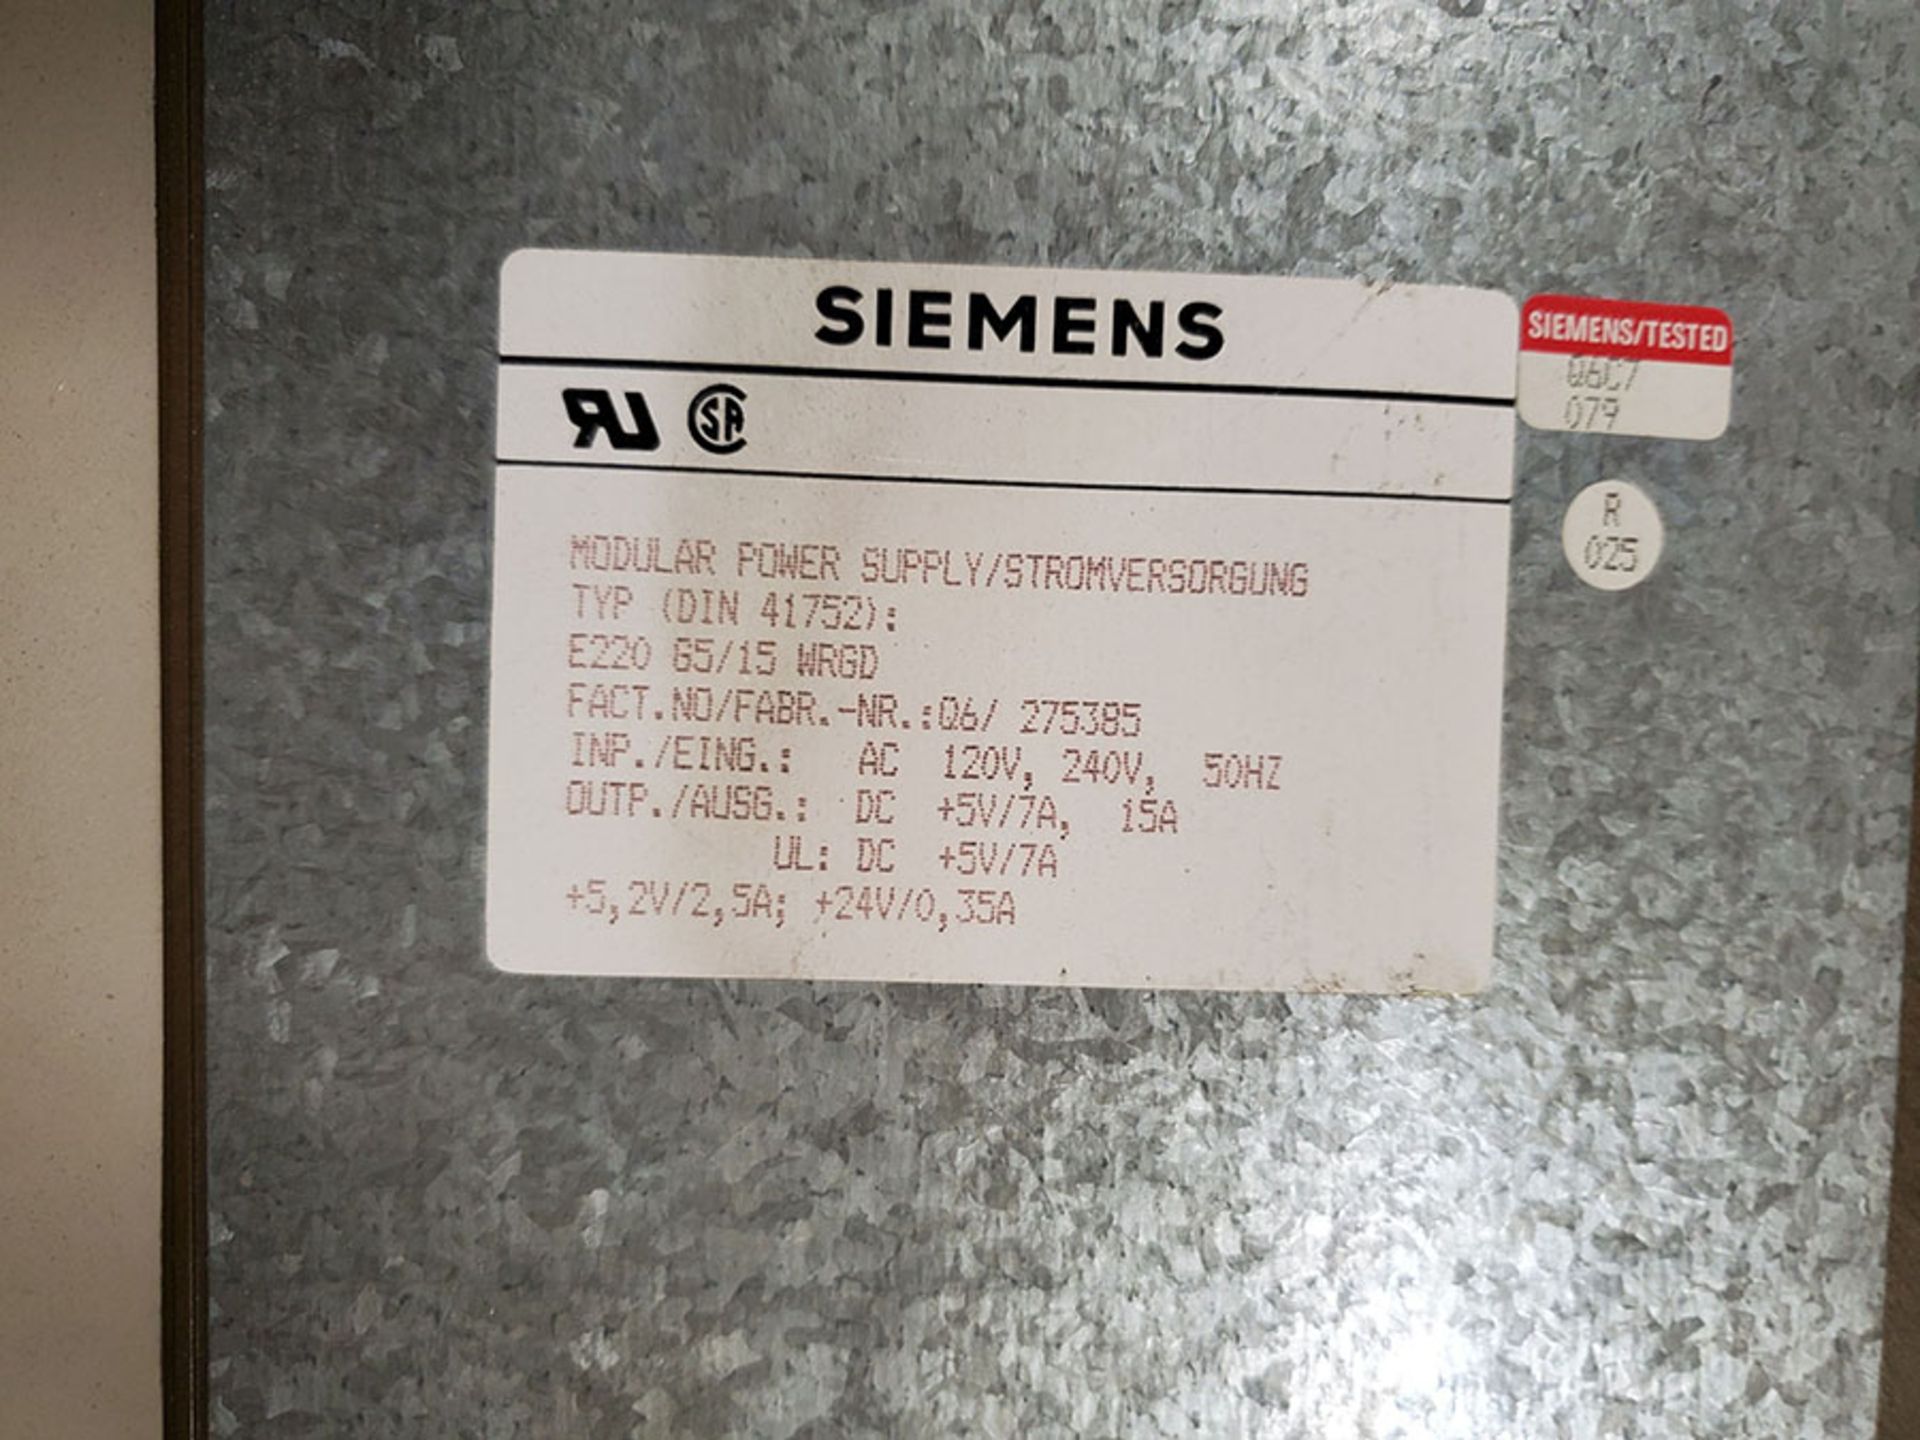 SKID OF SIEMENS INJECTION MOLDING MACHINE PARTS; MOTHER BOARD, CPU CARD, INPUT & OUTPUT - Image 7 of 9